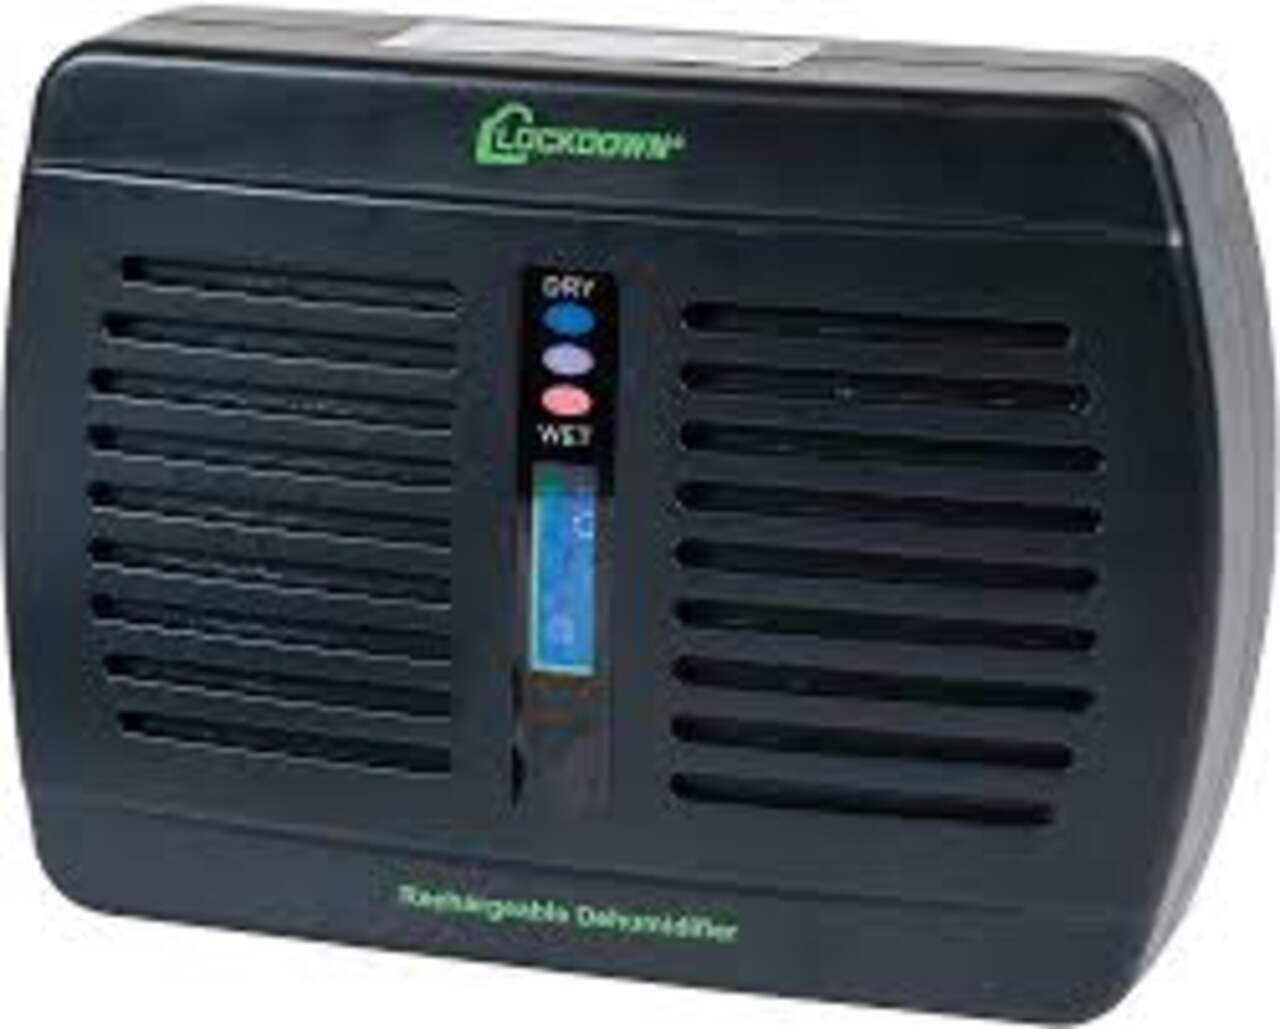 https://media-www.canadiantire.ca/product/playing/hunting/hunting-equipment/3750390/lockdown-rechargeable-dehumidifer-d0cecbcd-5b1b-4792-87ff-506d7b114dba.png?imdensity=1&imwidth=640&impolicy=mZoom